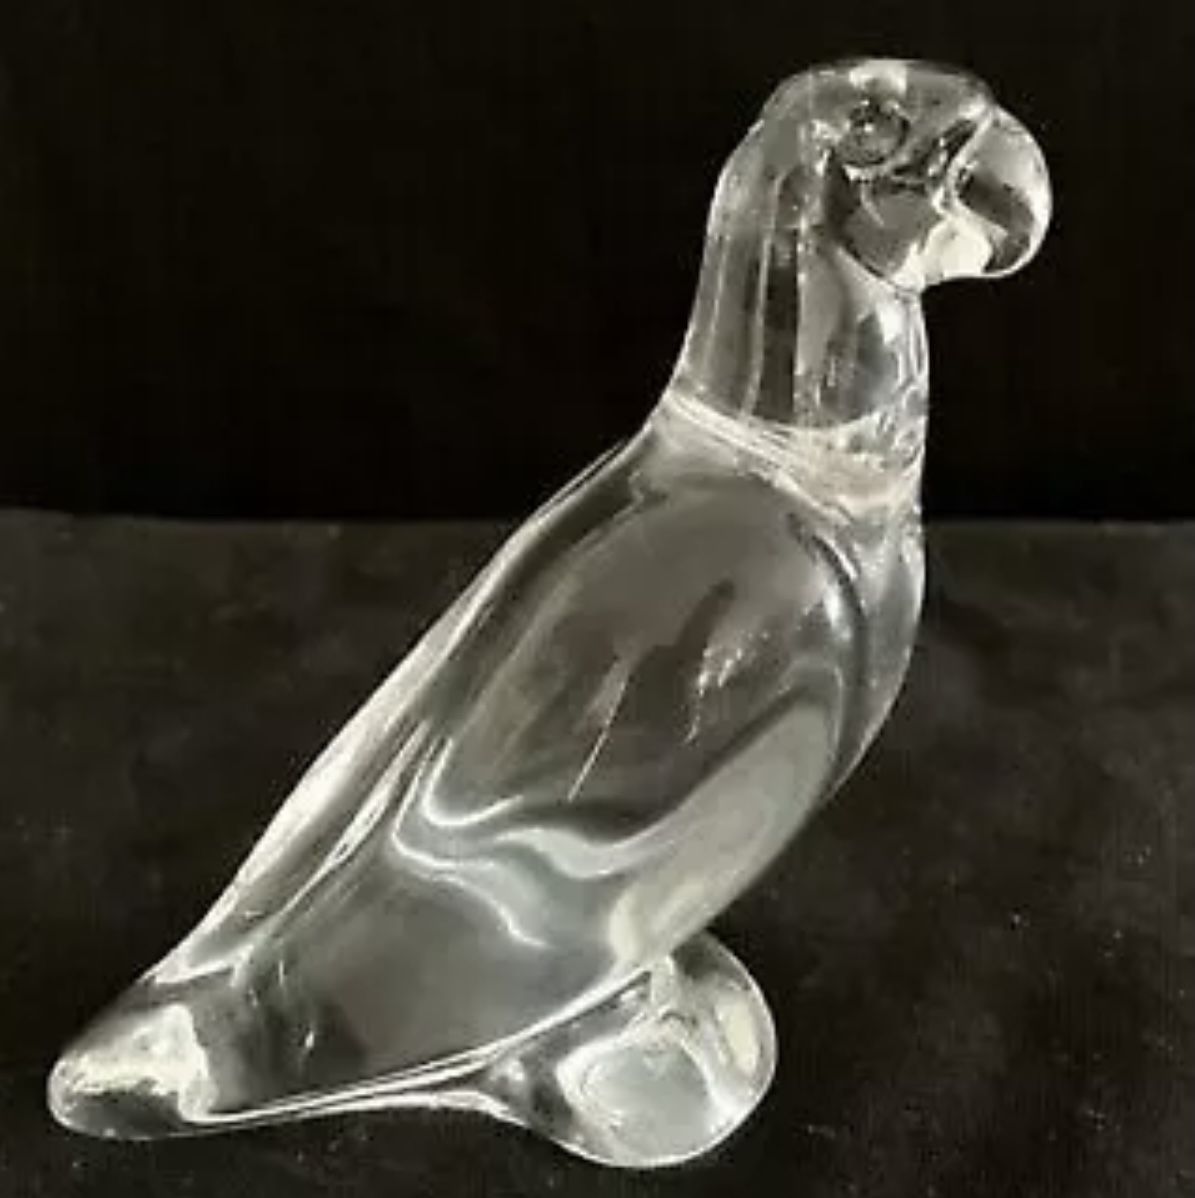 Baccarat PARROT clear Crystal Paperweight Figurine The Baccarat logo is acid etched on the base and "Baccarat" is scribed in script at the right-hand 